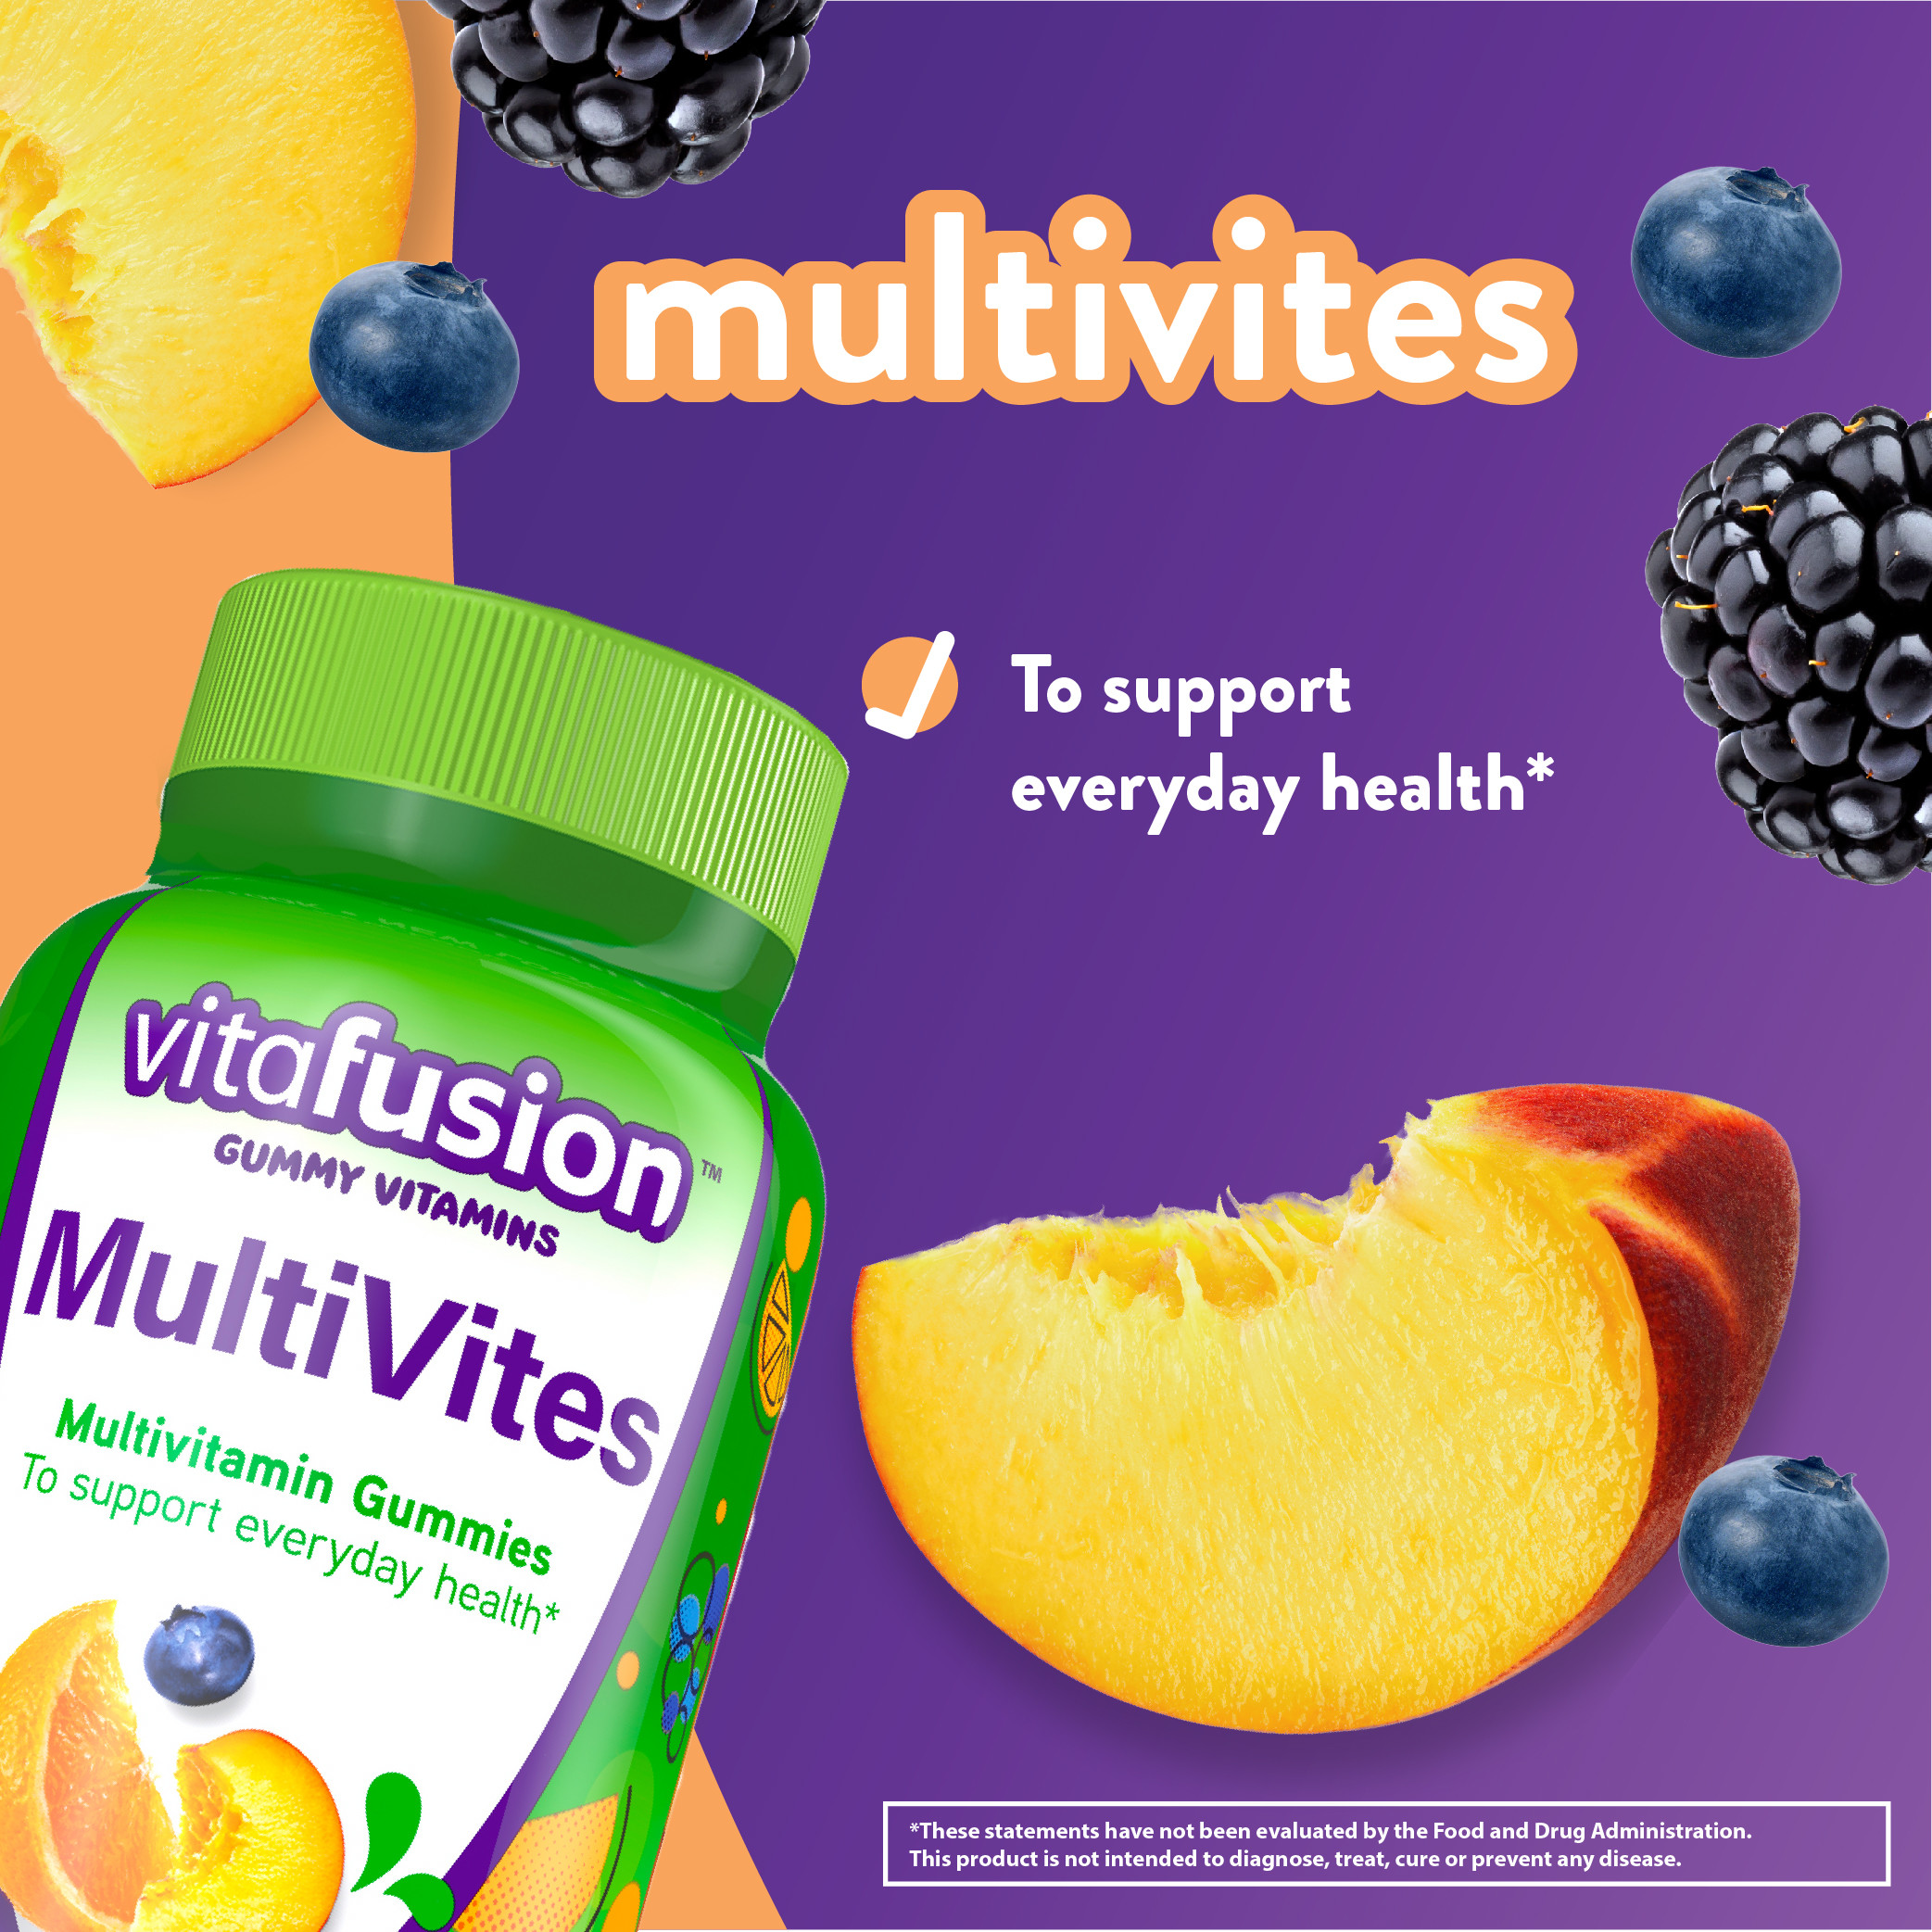 vitafusion MultiVites Gummy Multivitamins for Adults, Berry, Peach and Orange Flavored, 150 Count - image 5 of 9